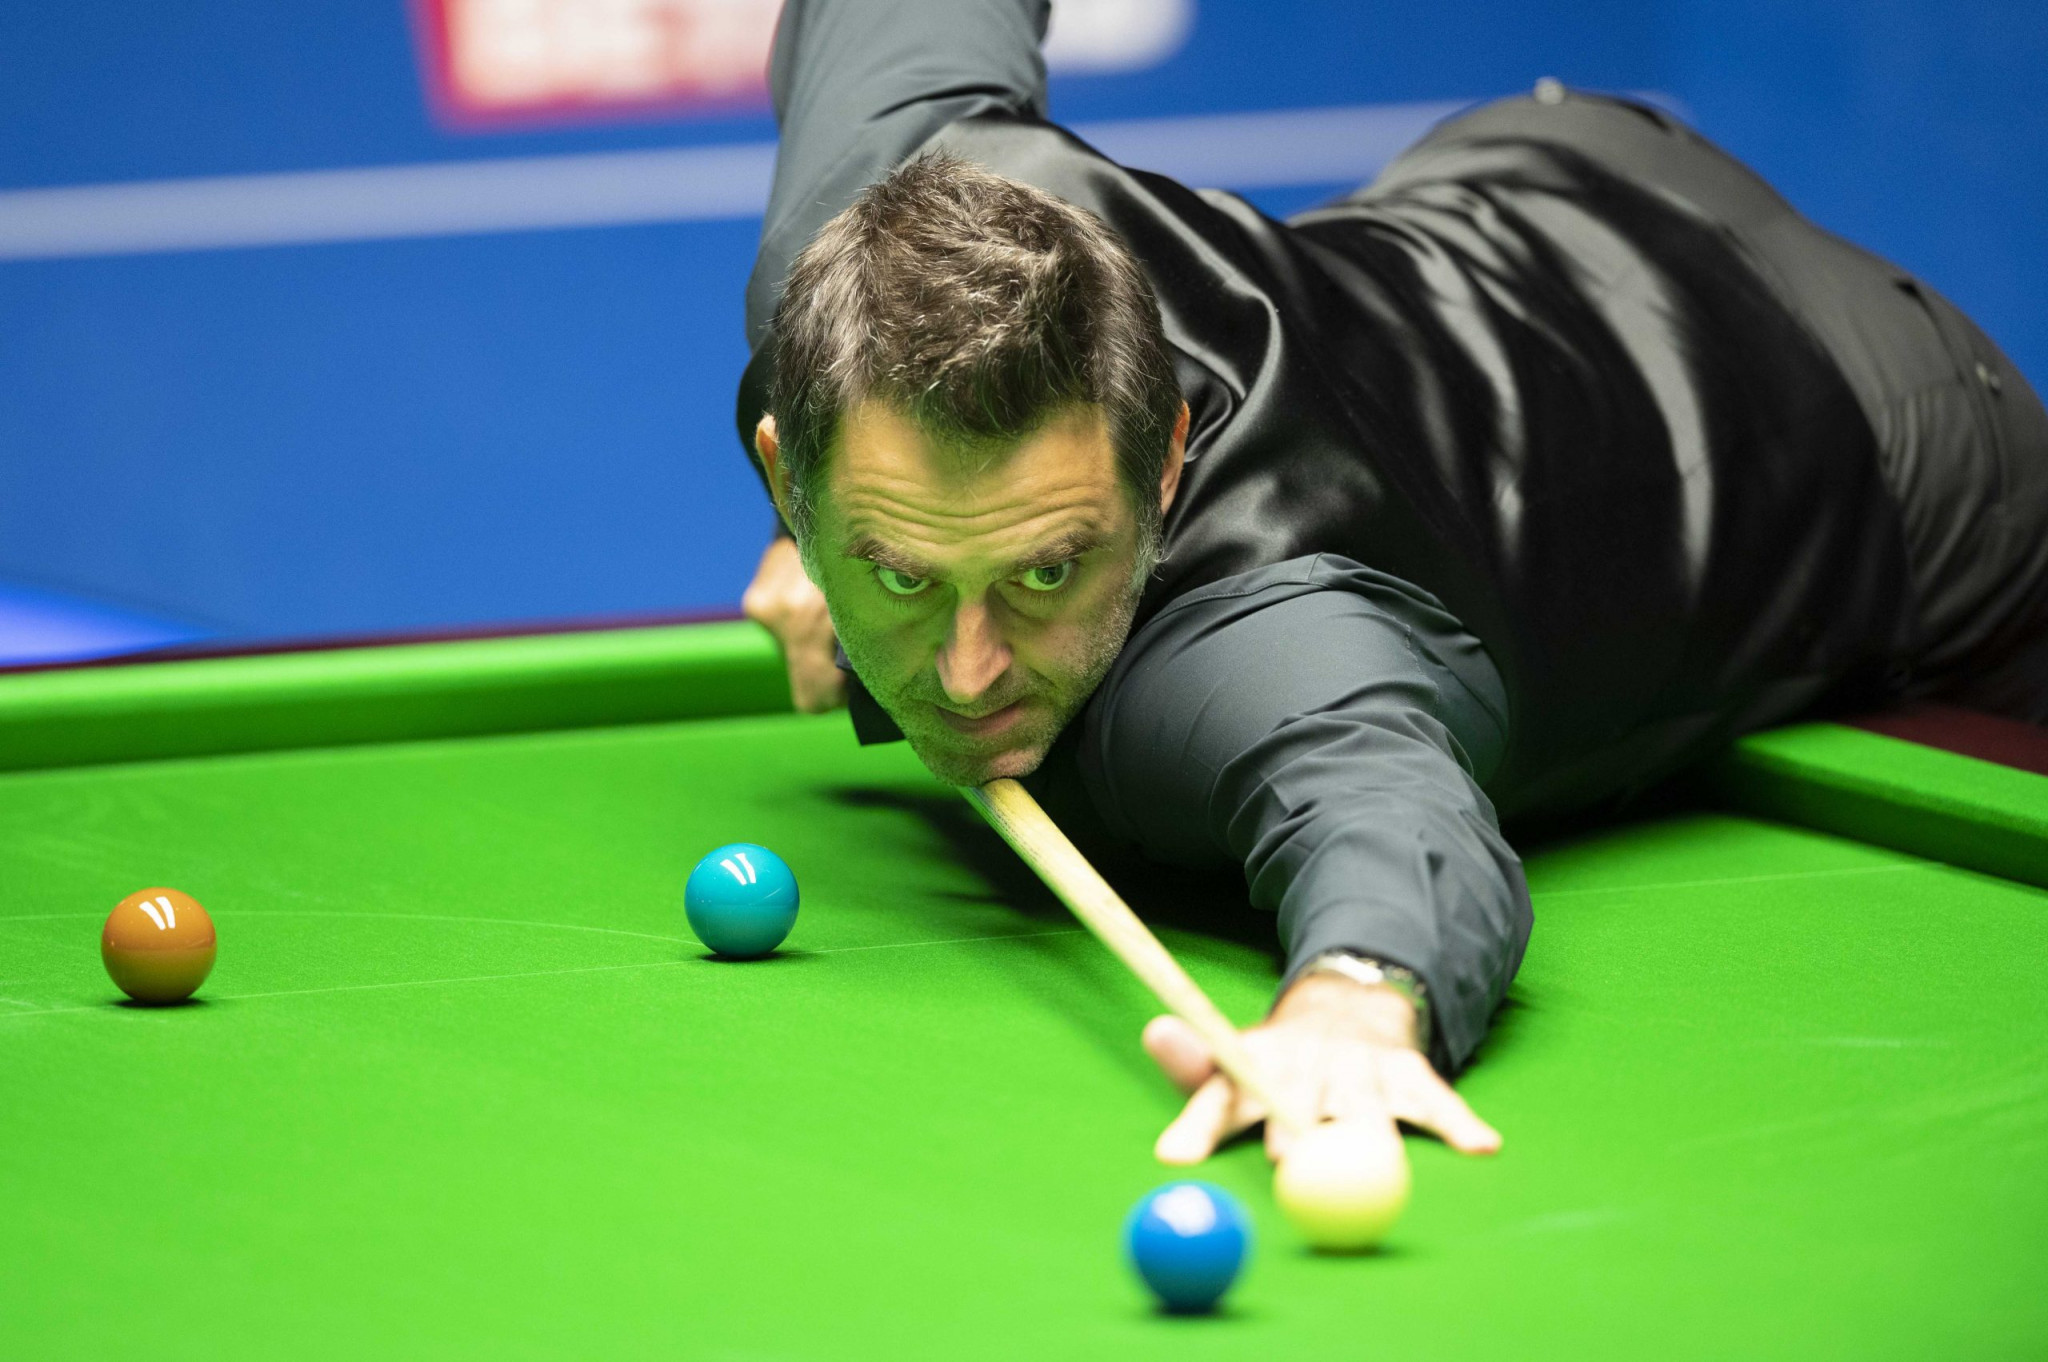 England's Ronnie O'Sullivan leads Kyren Wilson 10-7 after the first day of the World Snooker Championship final in Sheffield ©World Snooker 